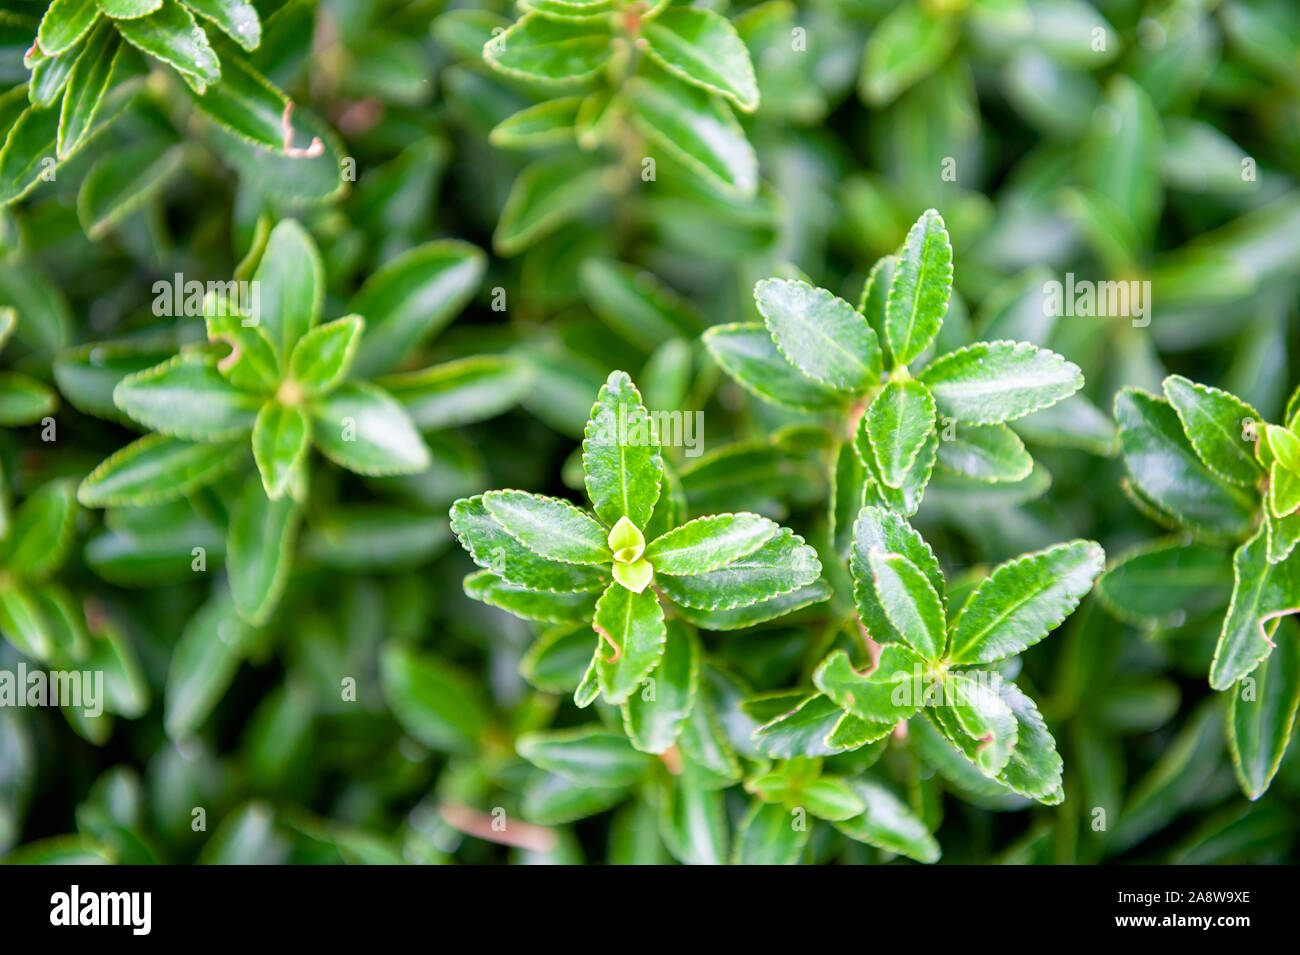 Green leaves Euonymus japonicus Microphyllus Stock Photo